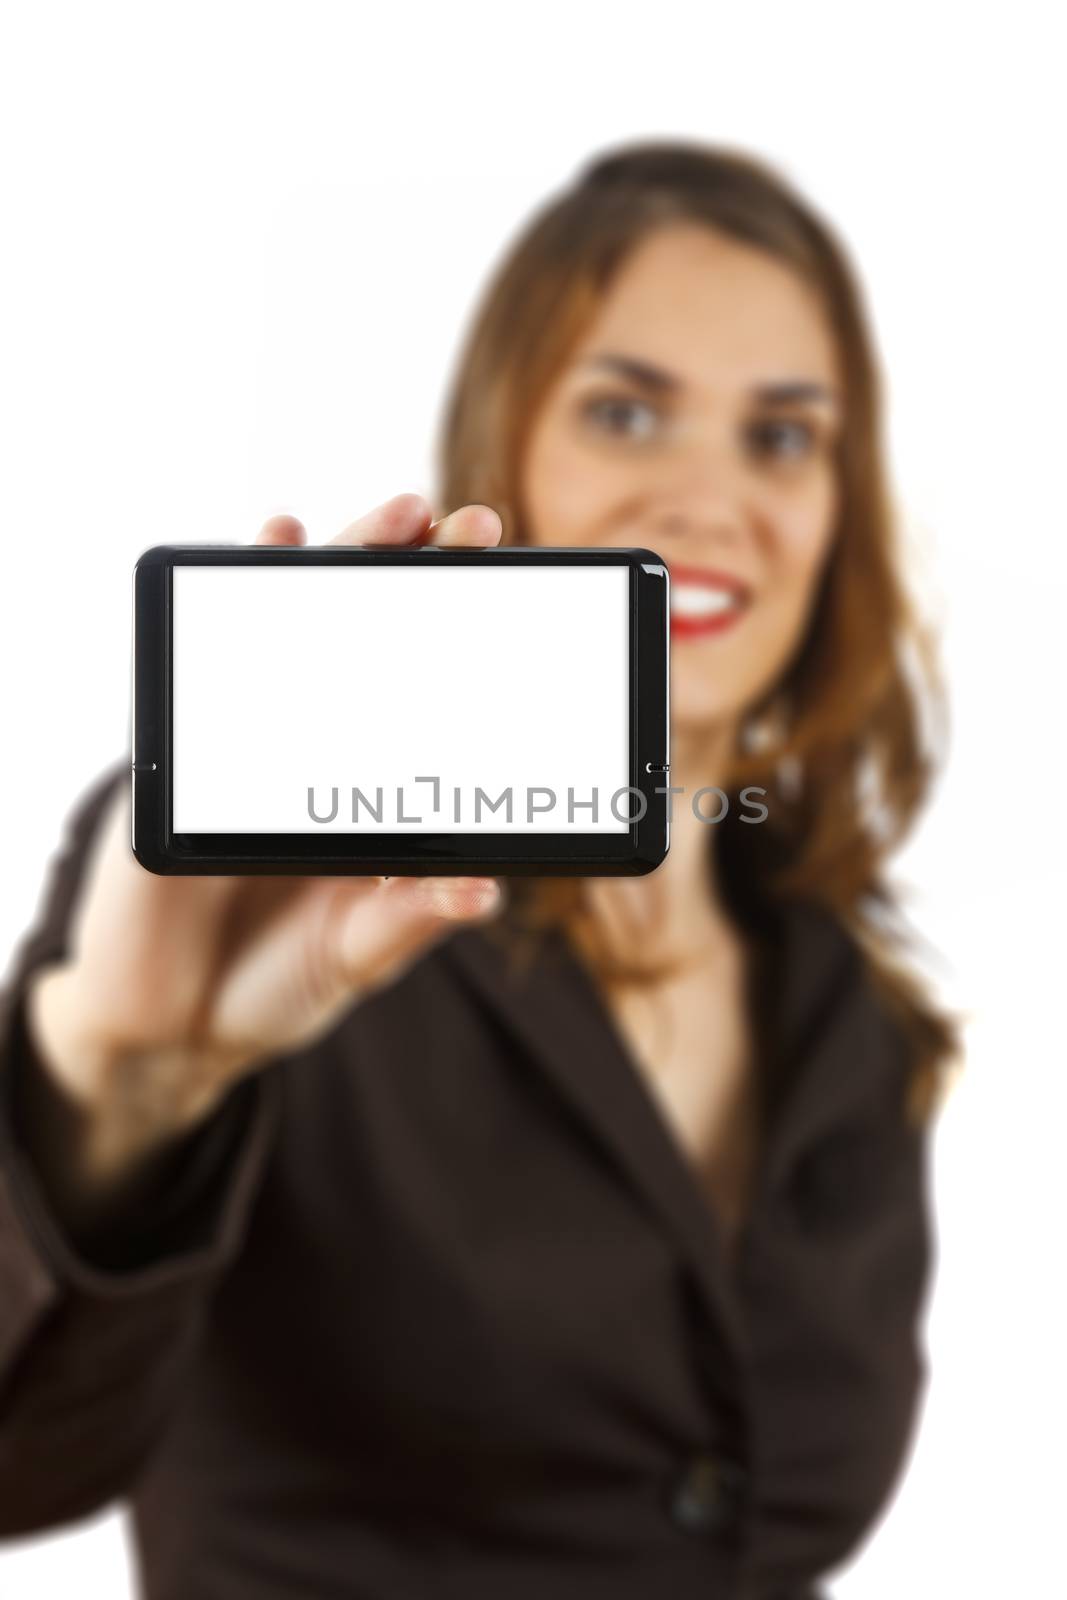 Businesswoman out of focus at background showing a global positioning system with white display. Isolated on white background.